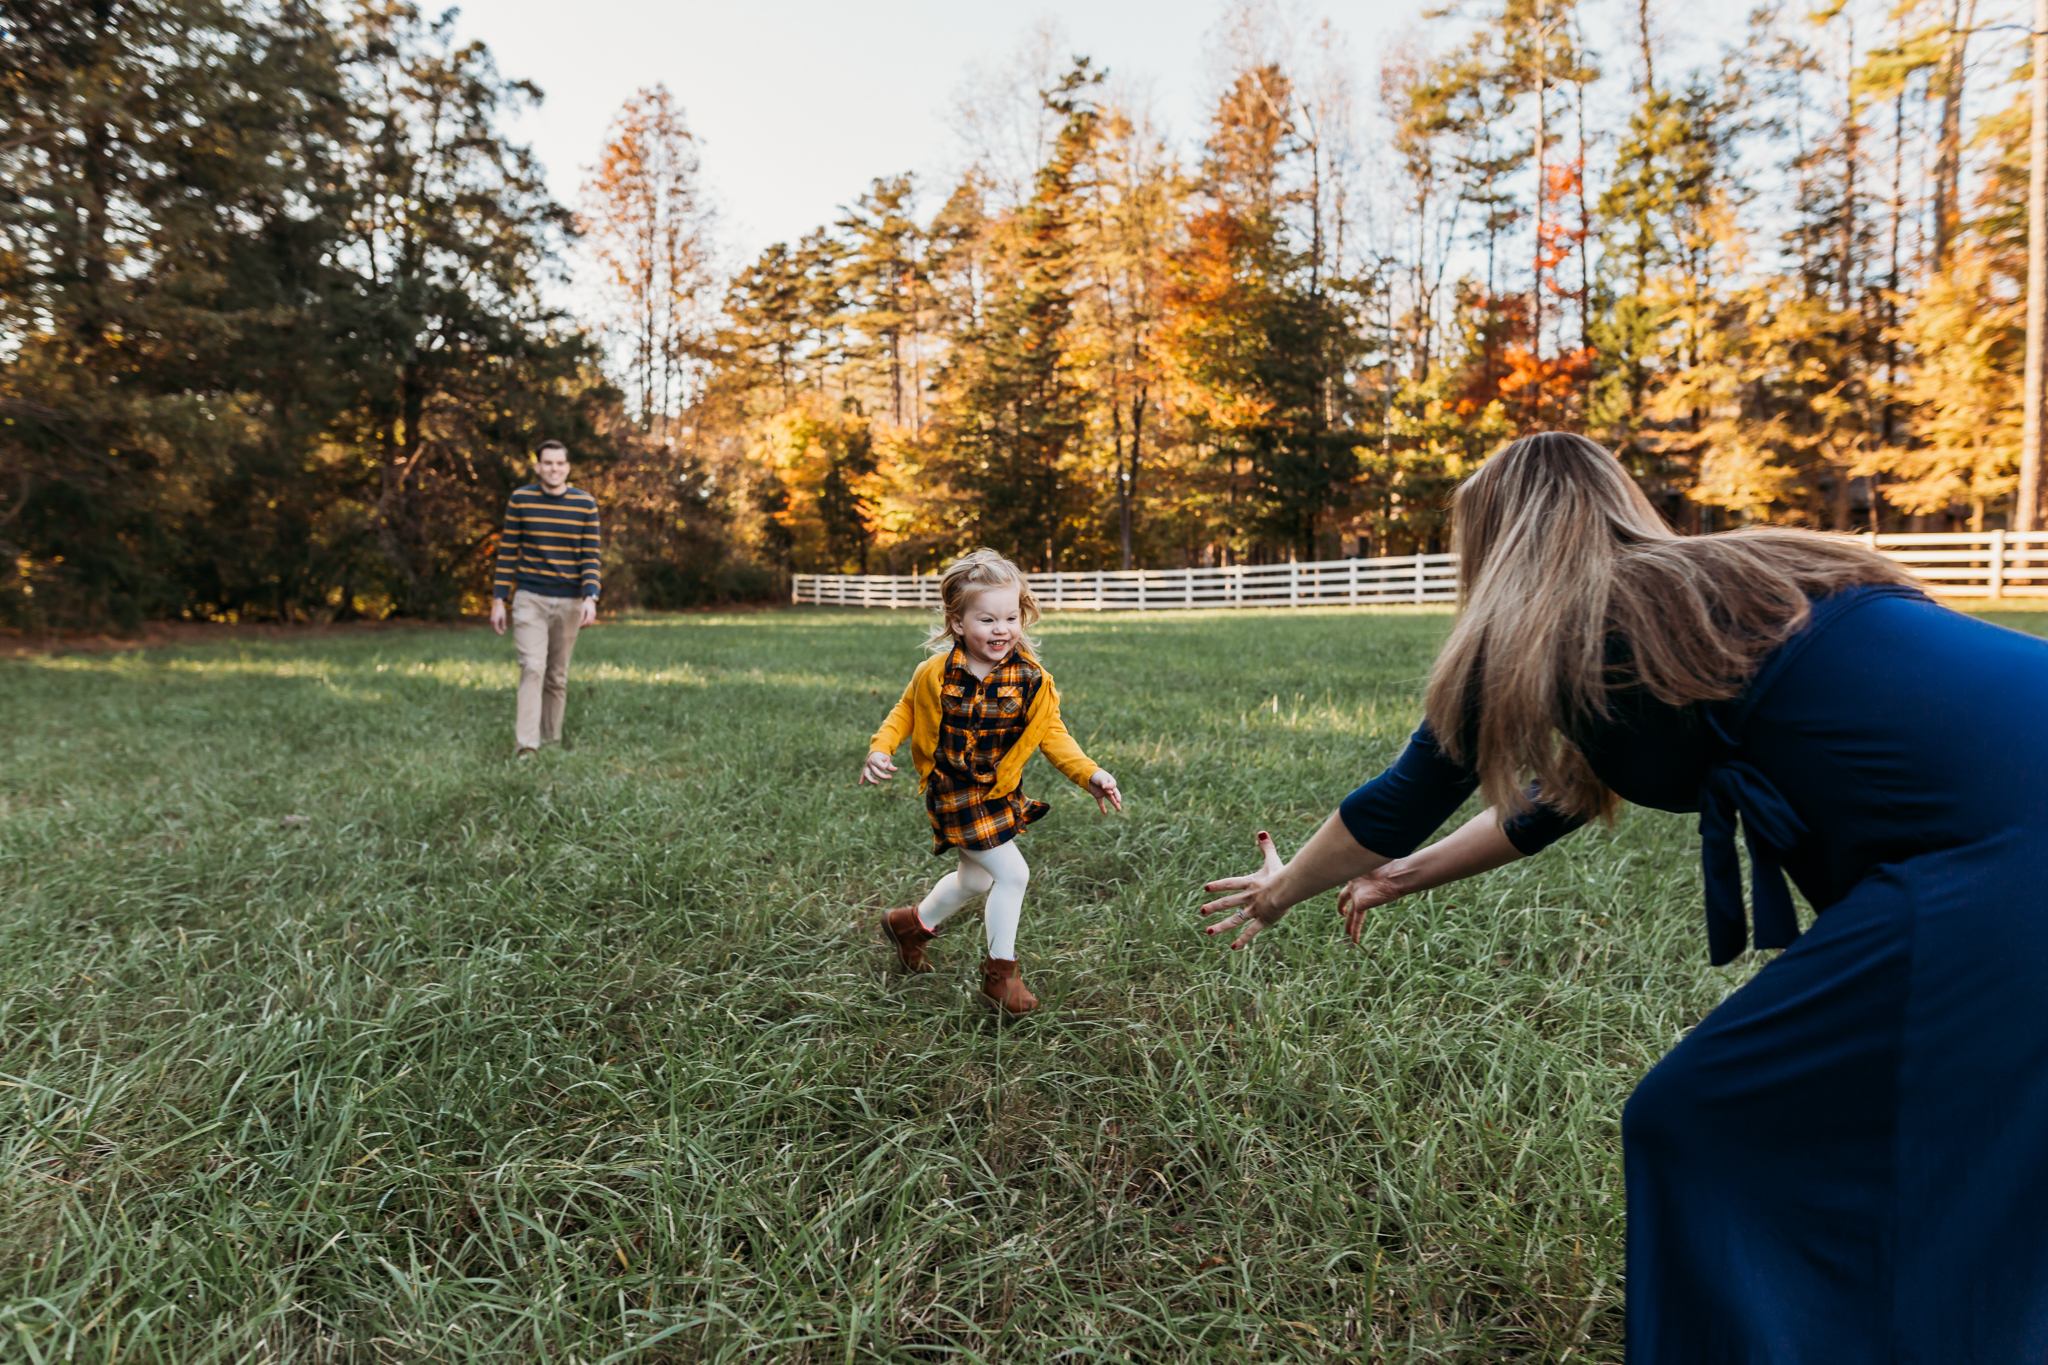 daughter running to mother in a field while dad watches